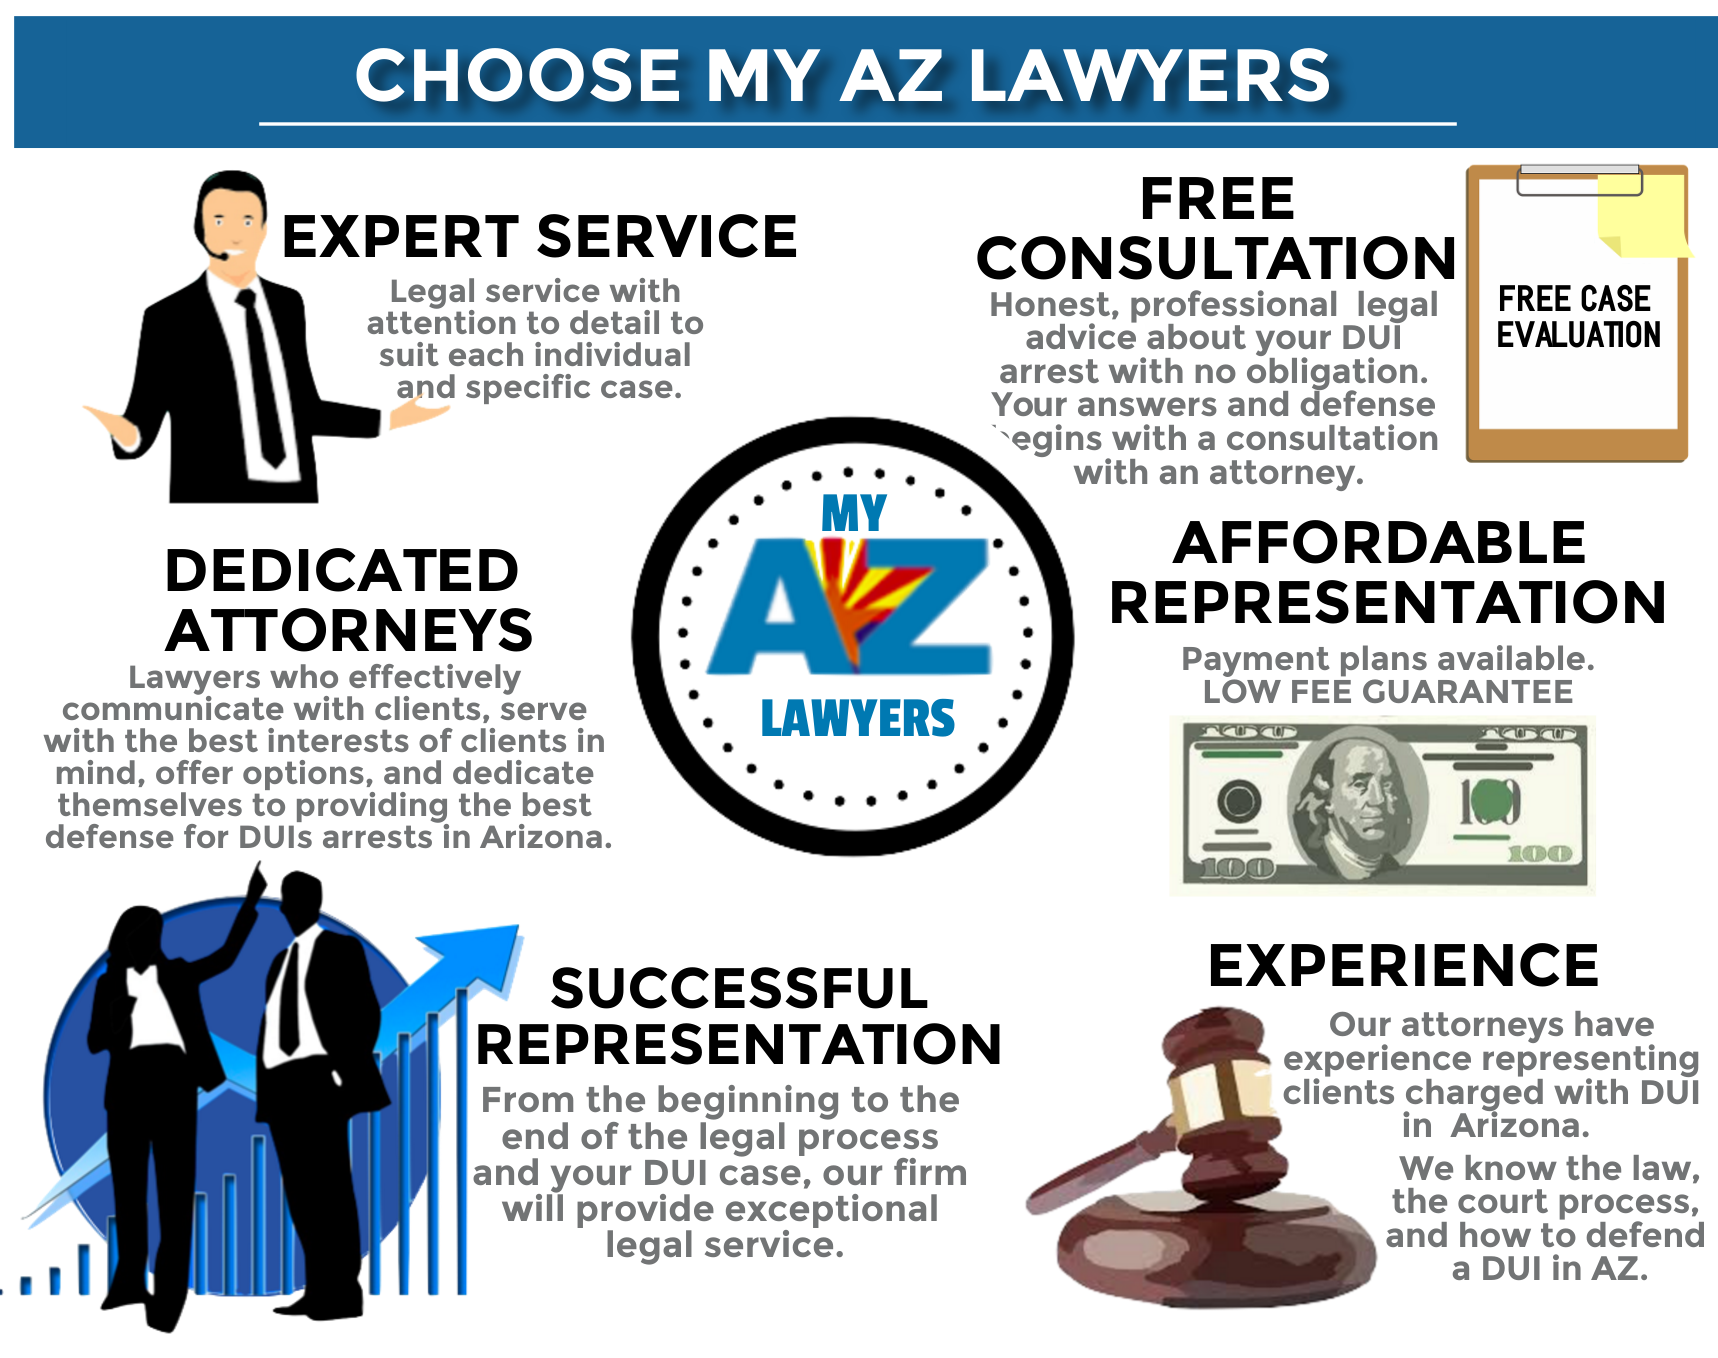 Why choose My AZ Lawyers infographic